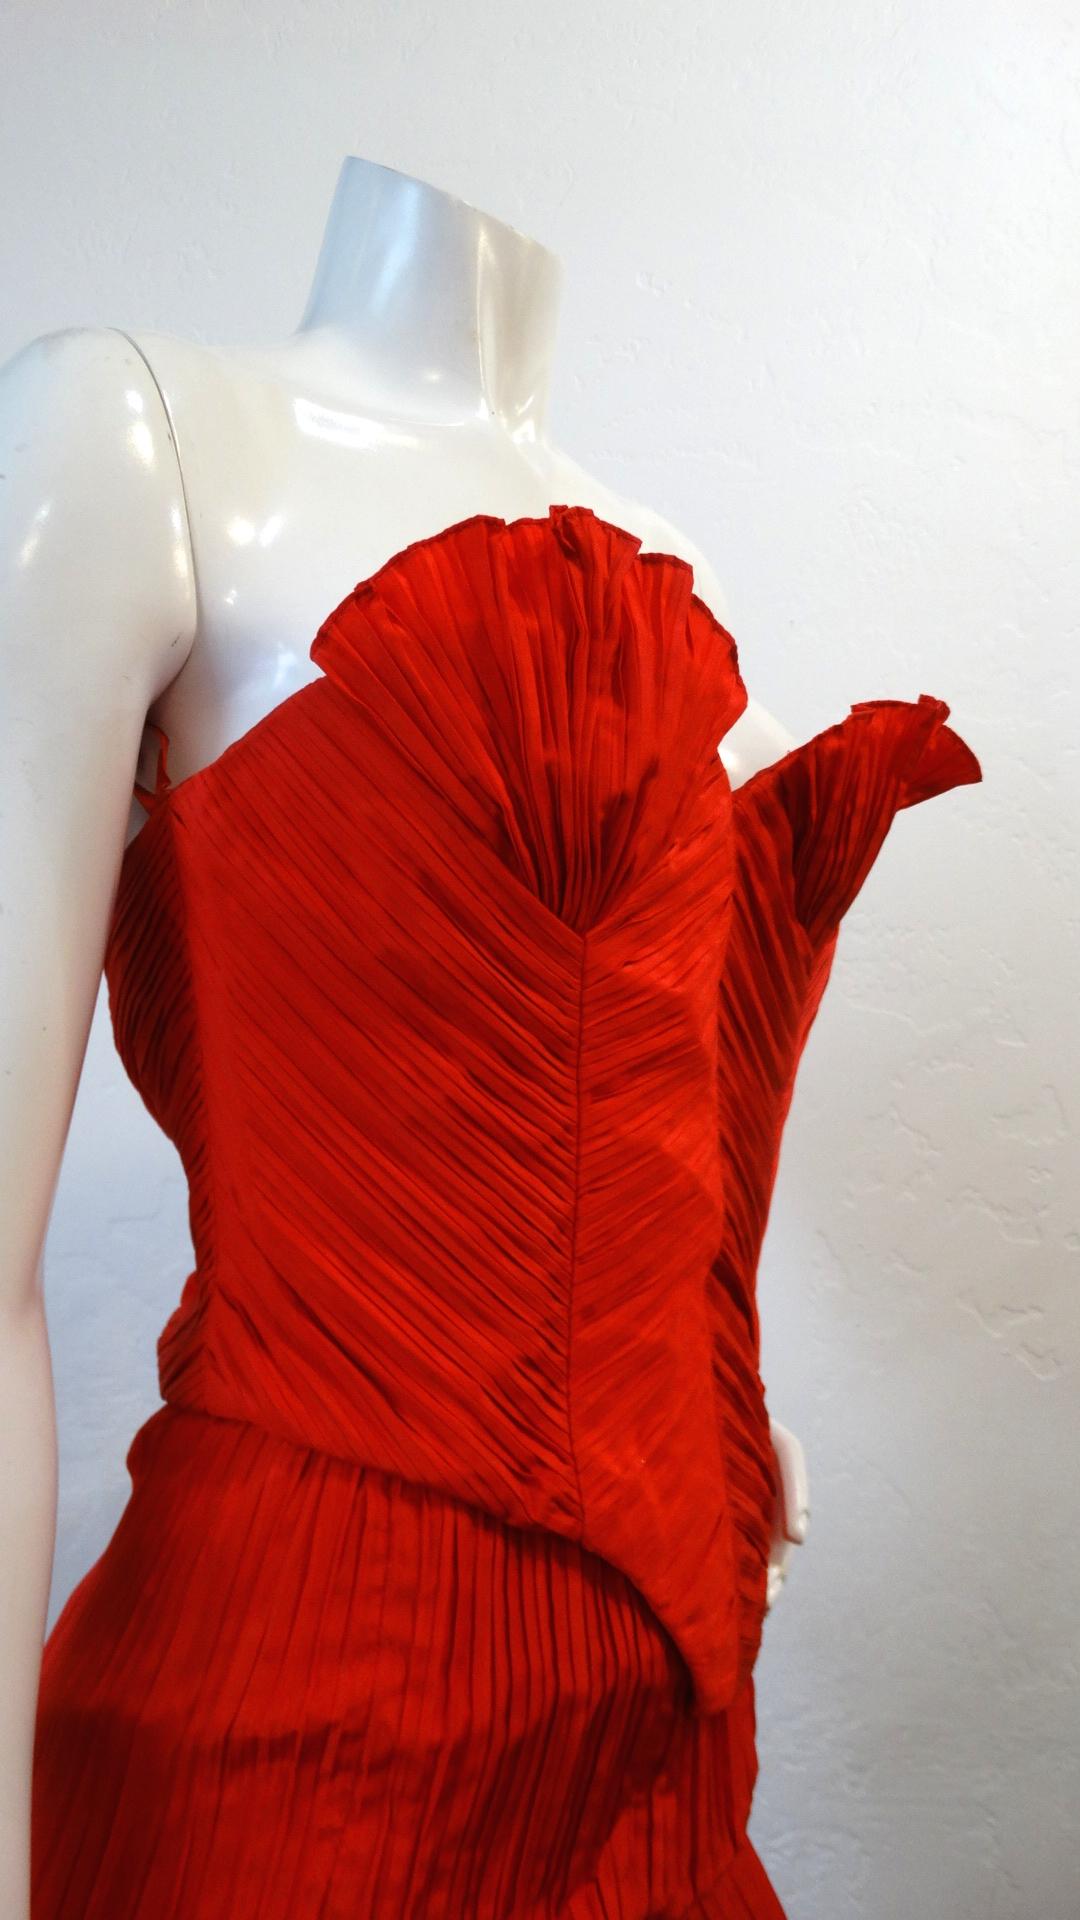 Make A Statement With This Amazing Piece! Circa 1980s, this Bernard Perris couture silk crepe bustier is a beautiful red color and features intricate asymmetrical pleating throughout. The cups on the bustier are high standing and mimic a shell like